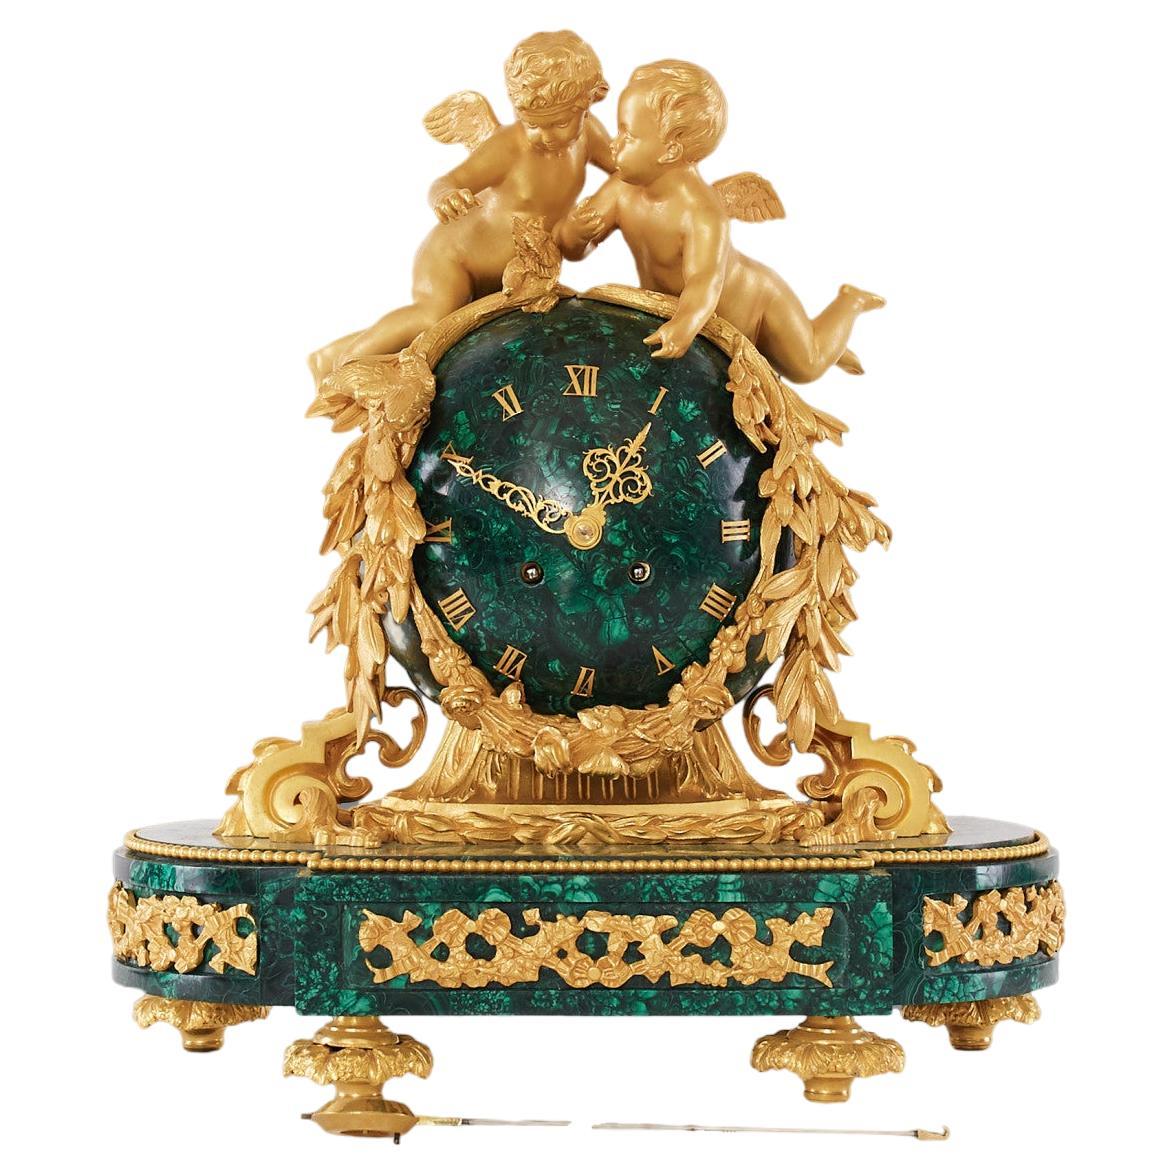 BY E.DUMOULINEUF À PARIS A of mantel clock in the style of Louis XVI, the 19th c